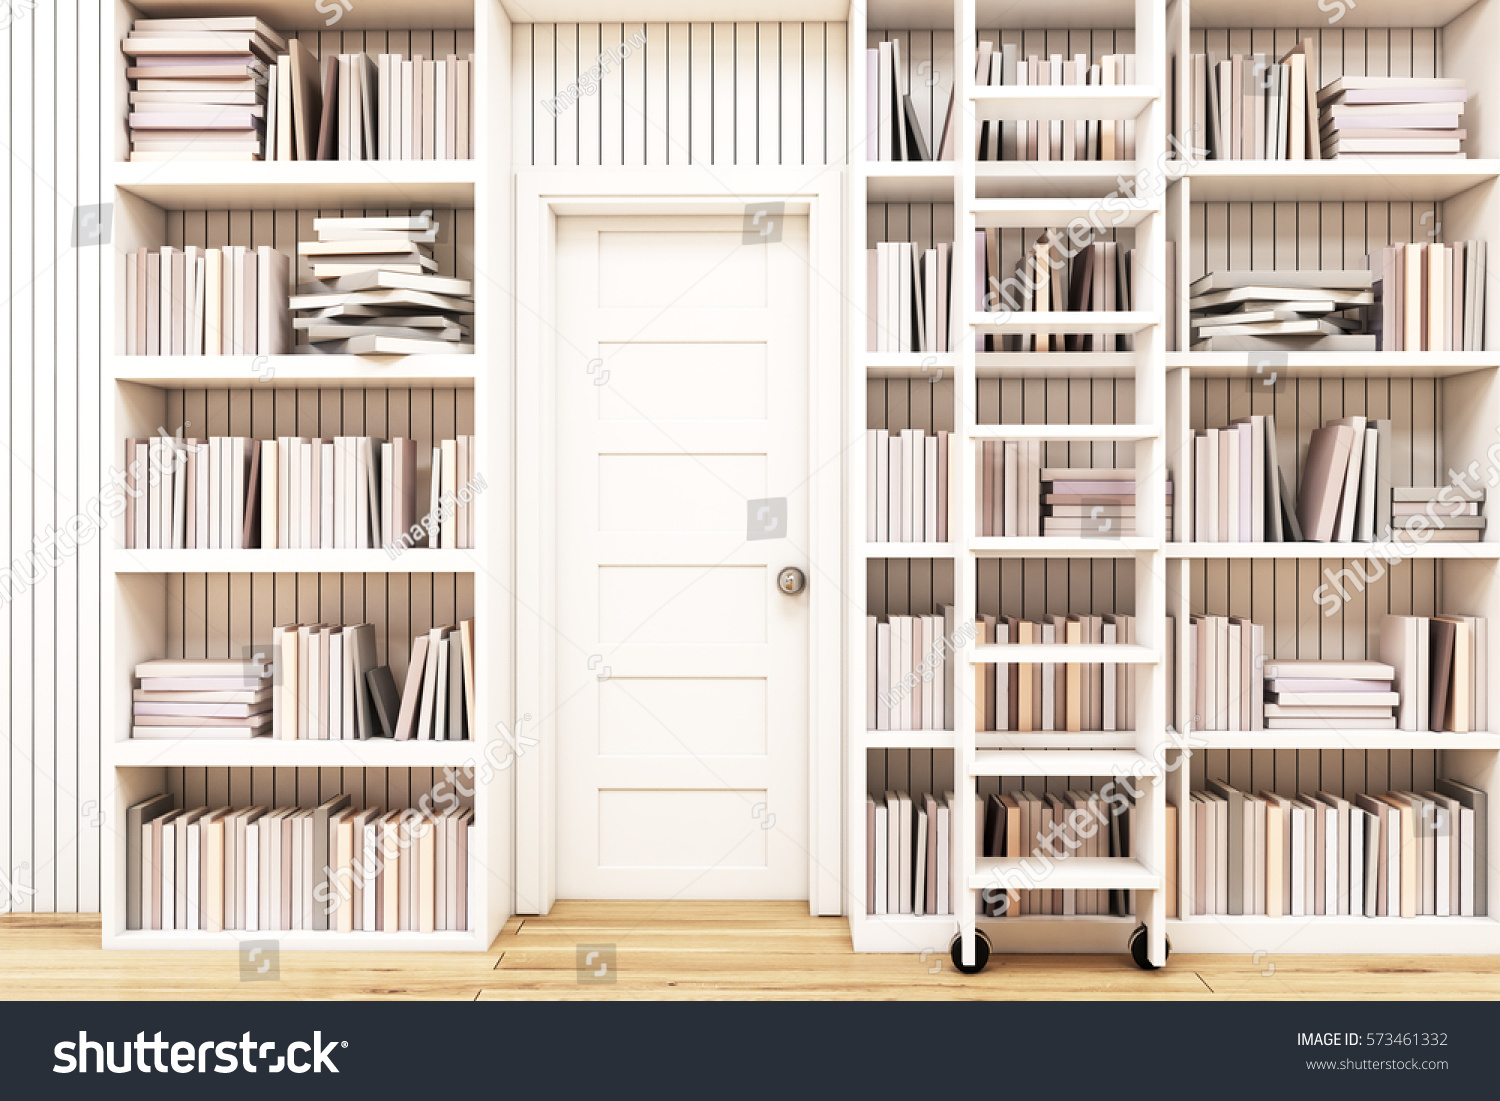 Home library interior with bookshelves by the sides of a door and a ladder to gain access to the books on high shelves. 3d rendering.  #573461332